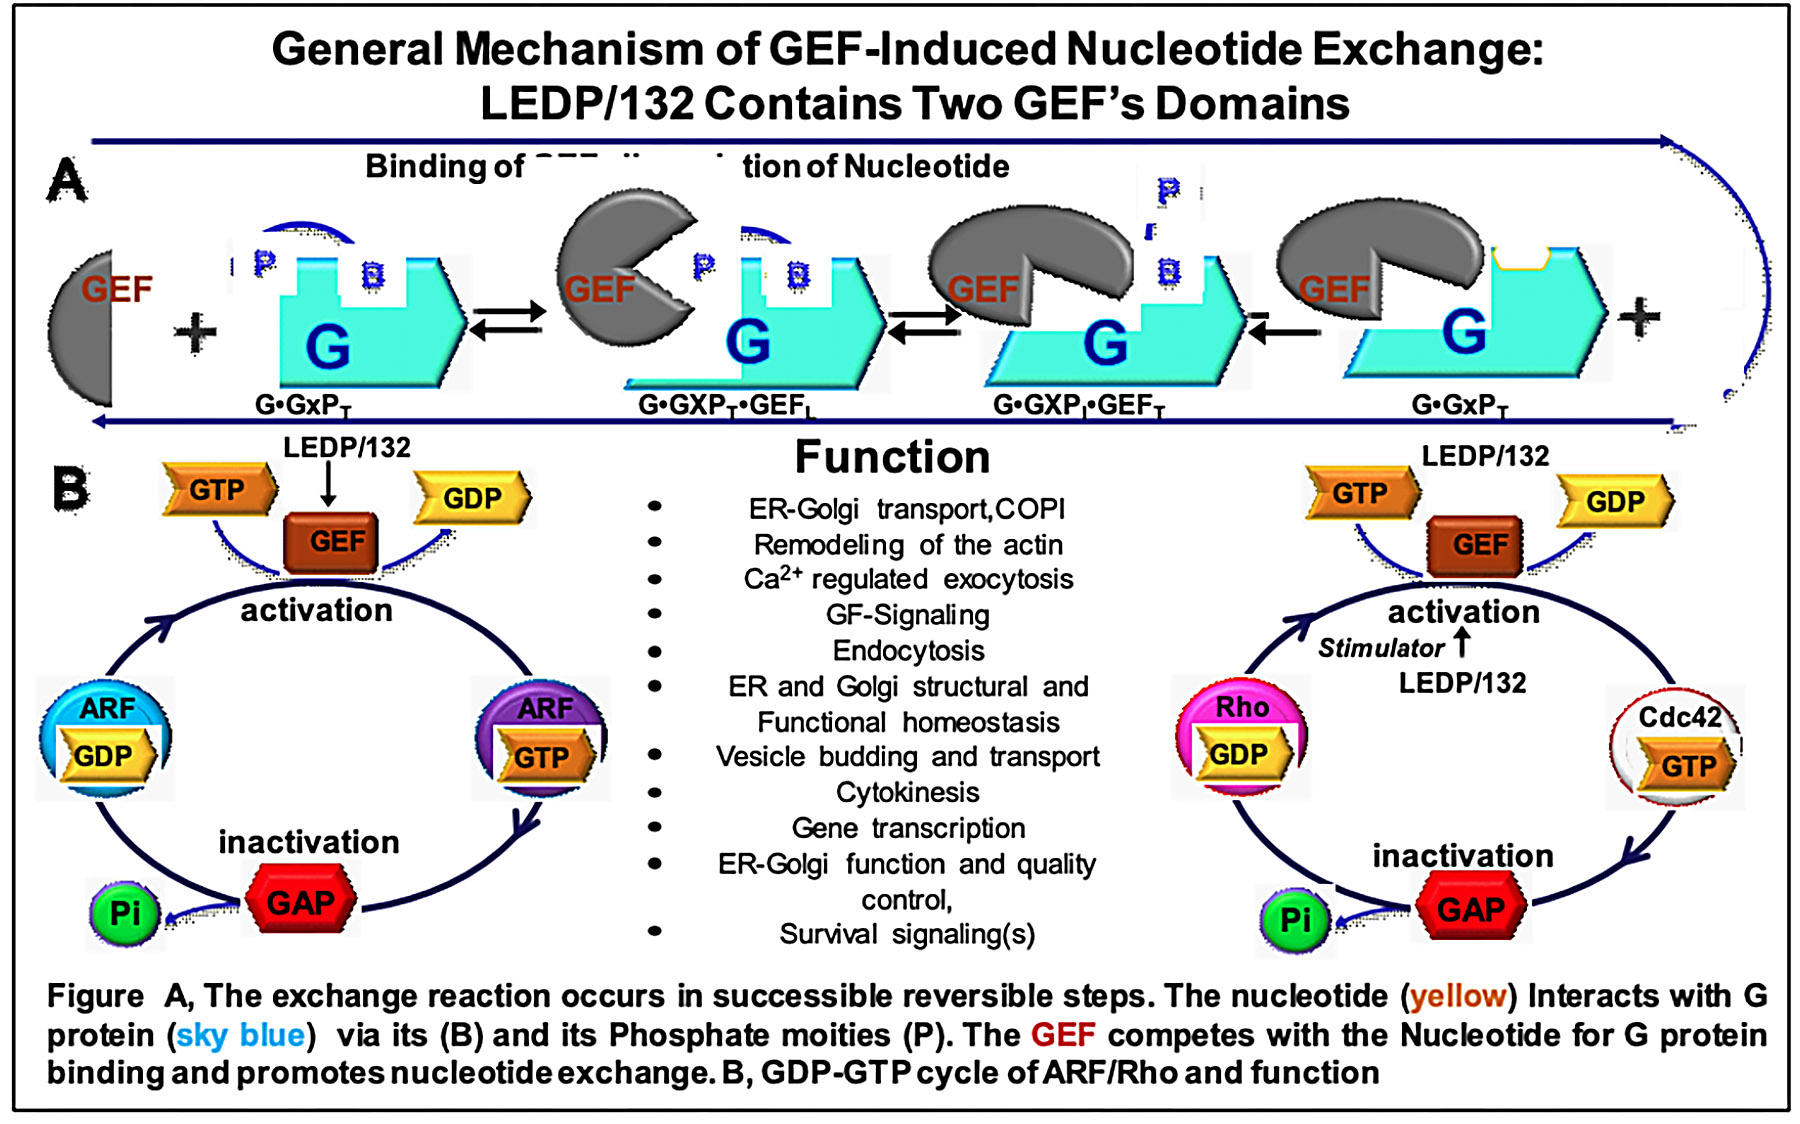 Graphic showing the general mechanism of GEF-induced nucleotide exchange